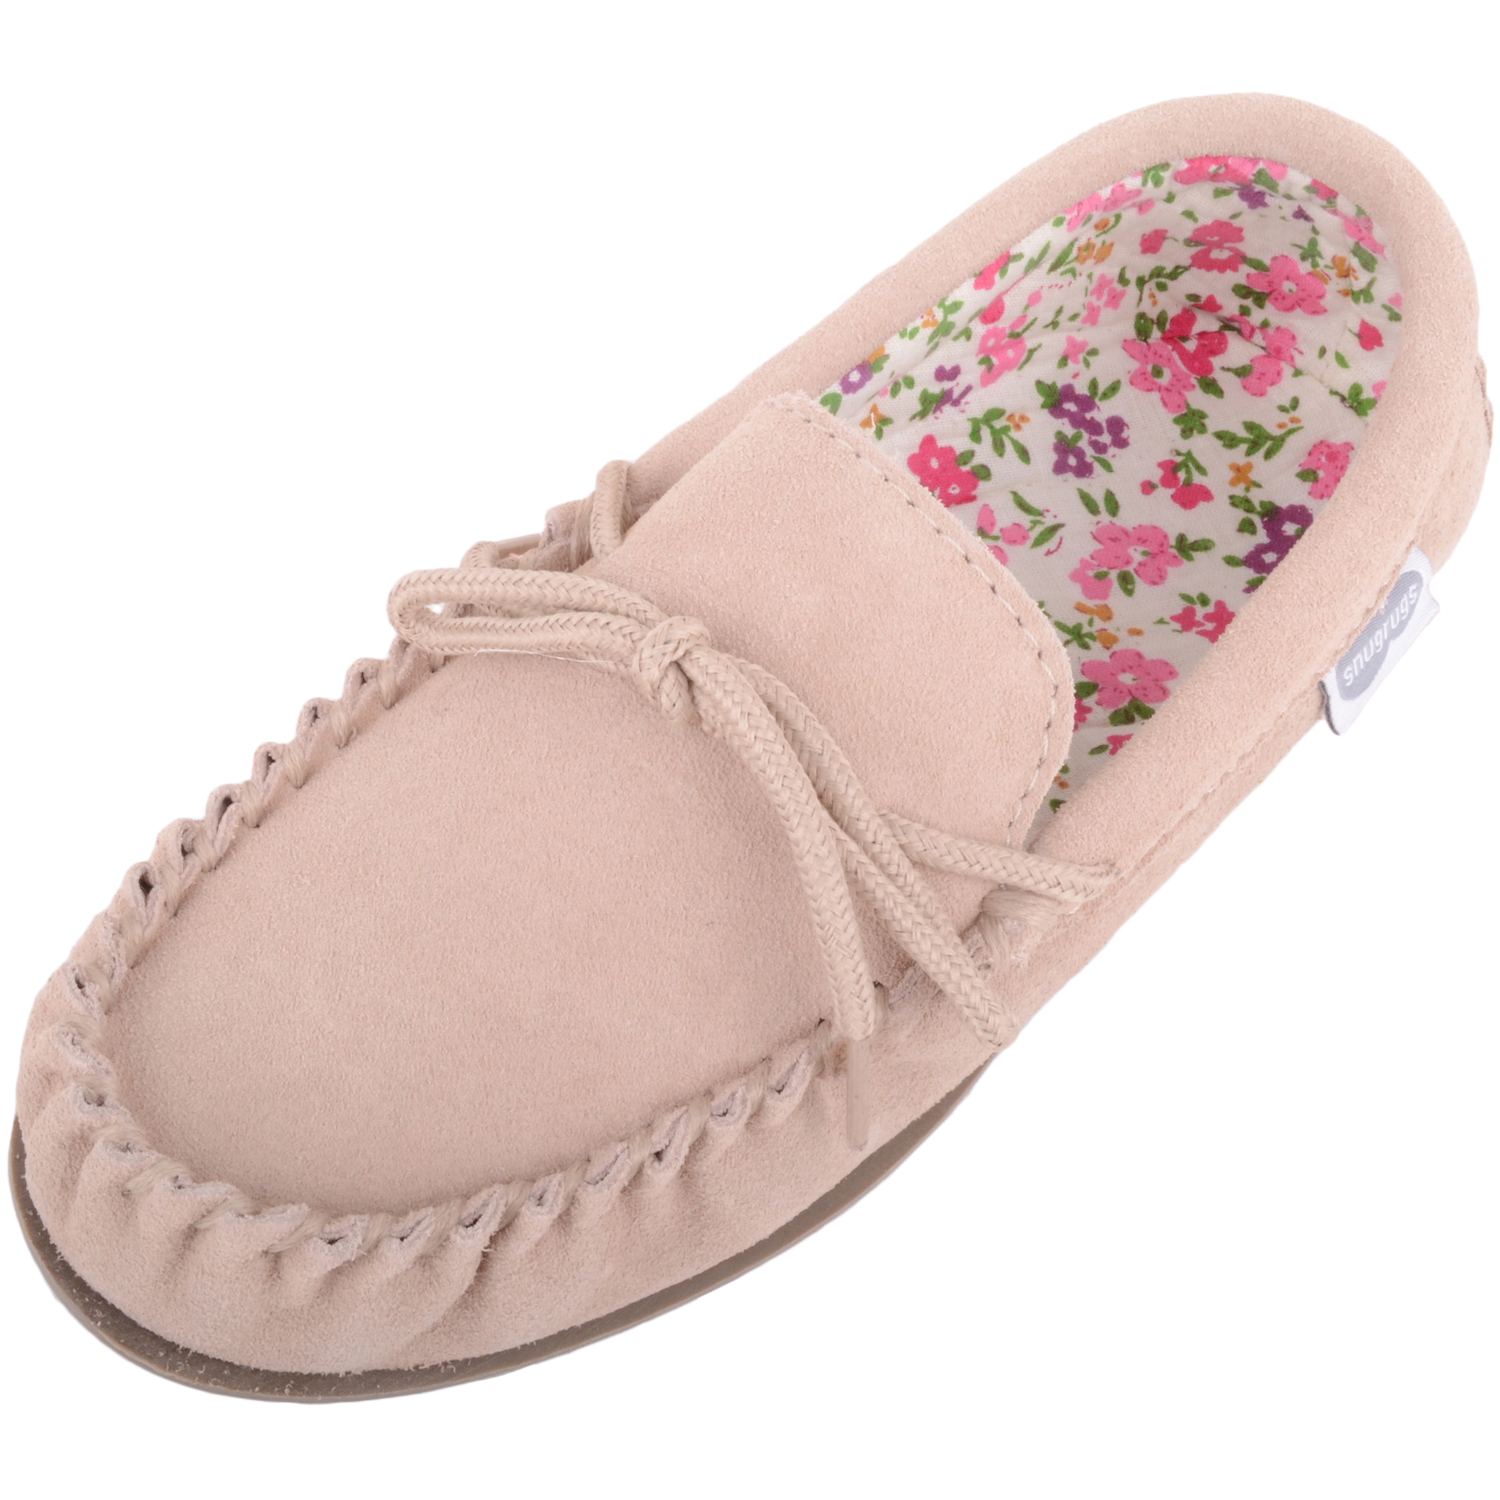 ladies leather moccasin slippers